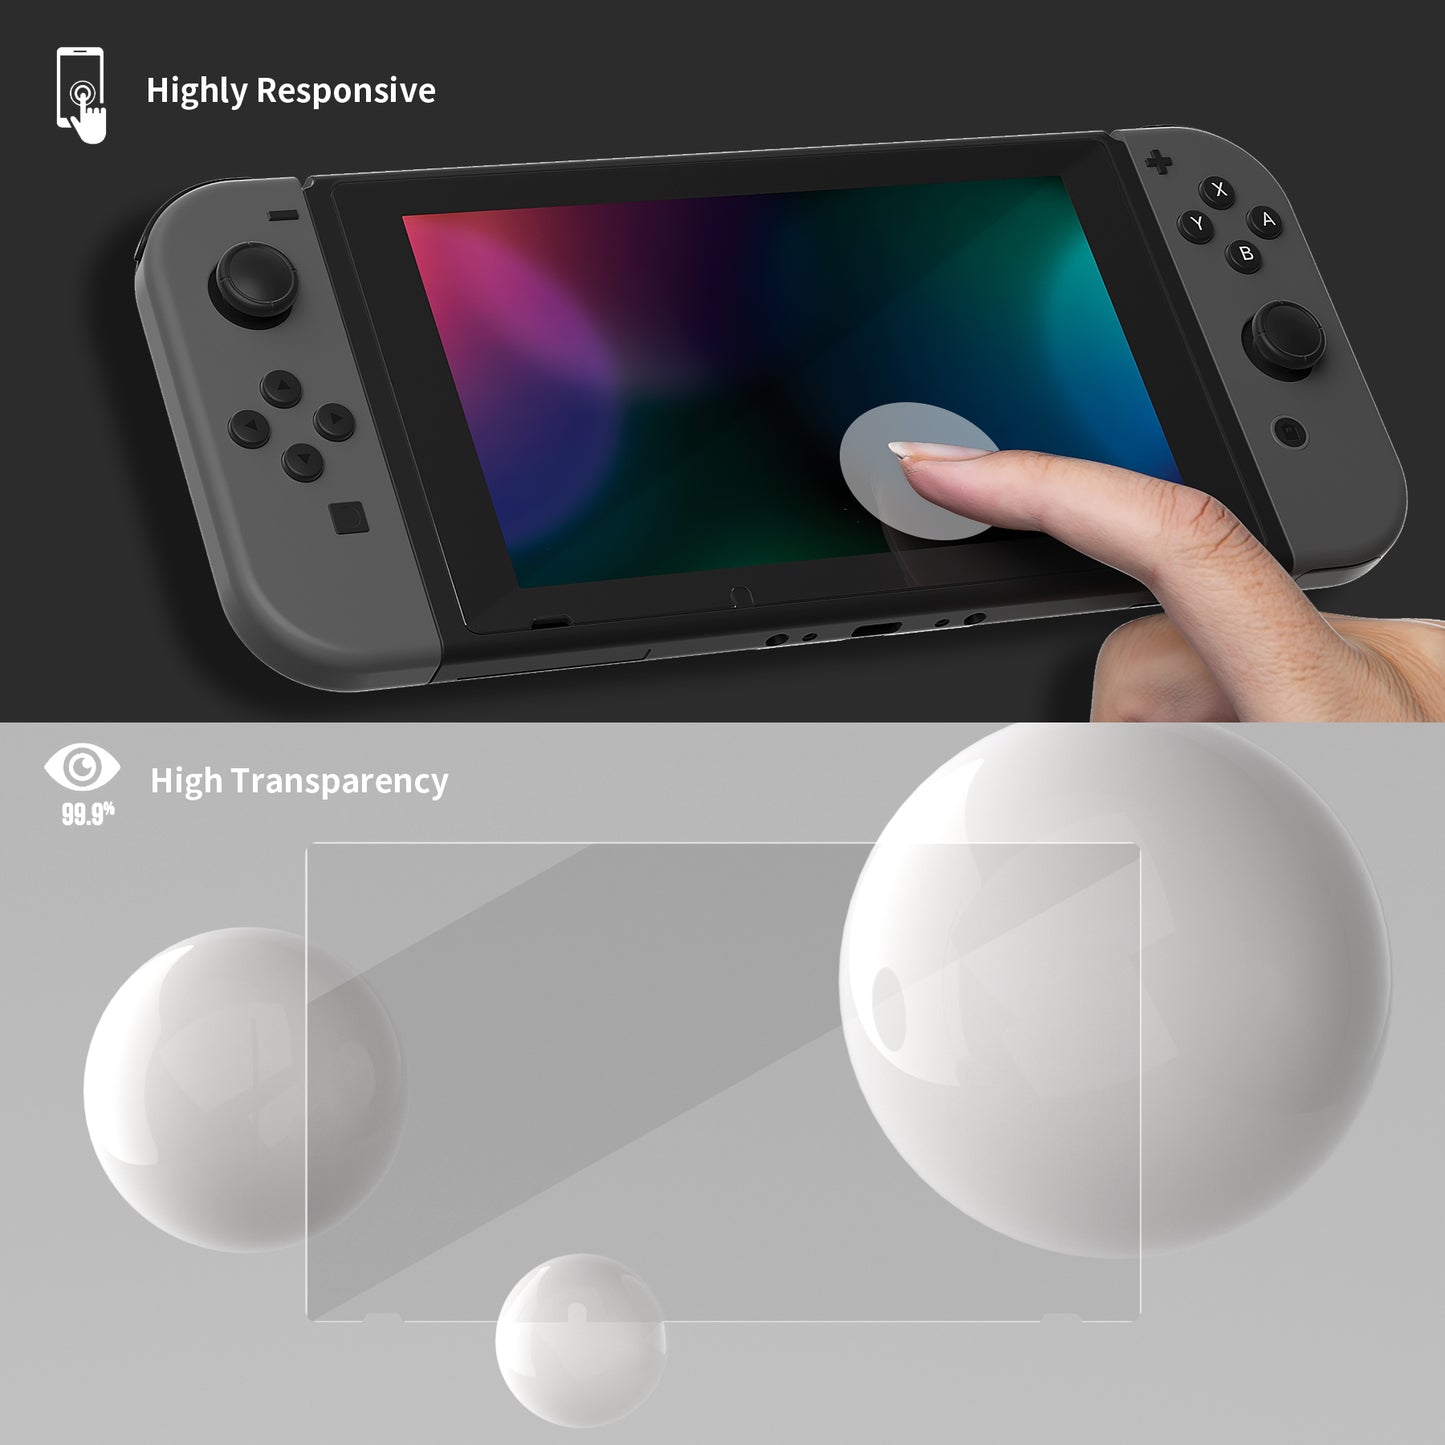 2 Pack Transparent Clear HD Saver Protector Film, Tempered Glass Screen Protector for Nintendo Switch [Anti-Scratch, Anti-Fingerprint, Shatterproof, Bubble-Free] - NSPJ0710 playvital